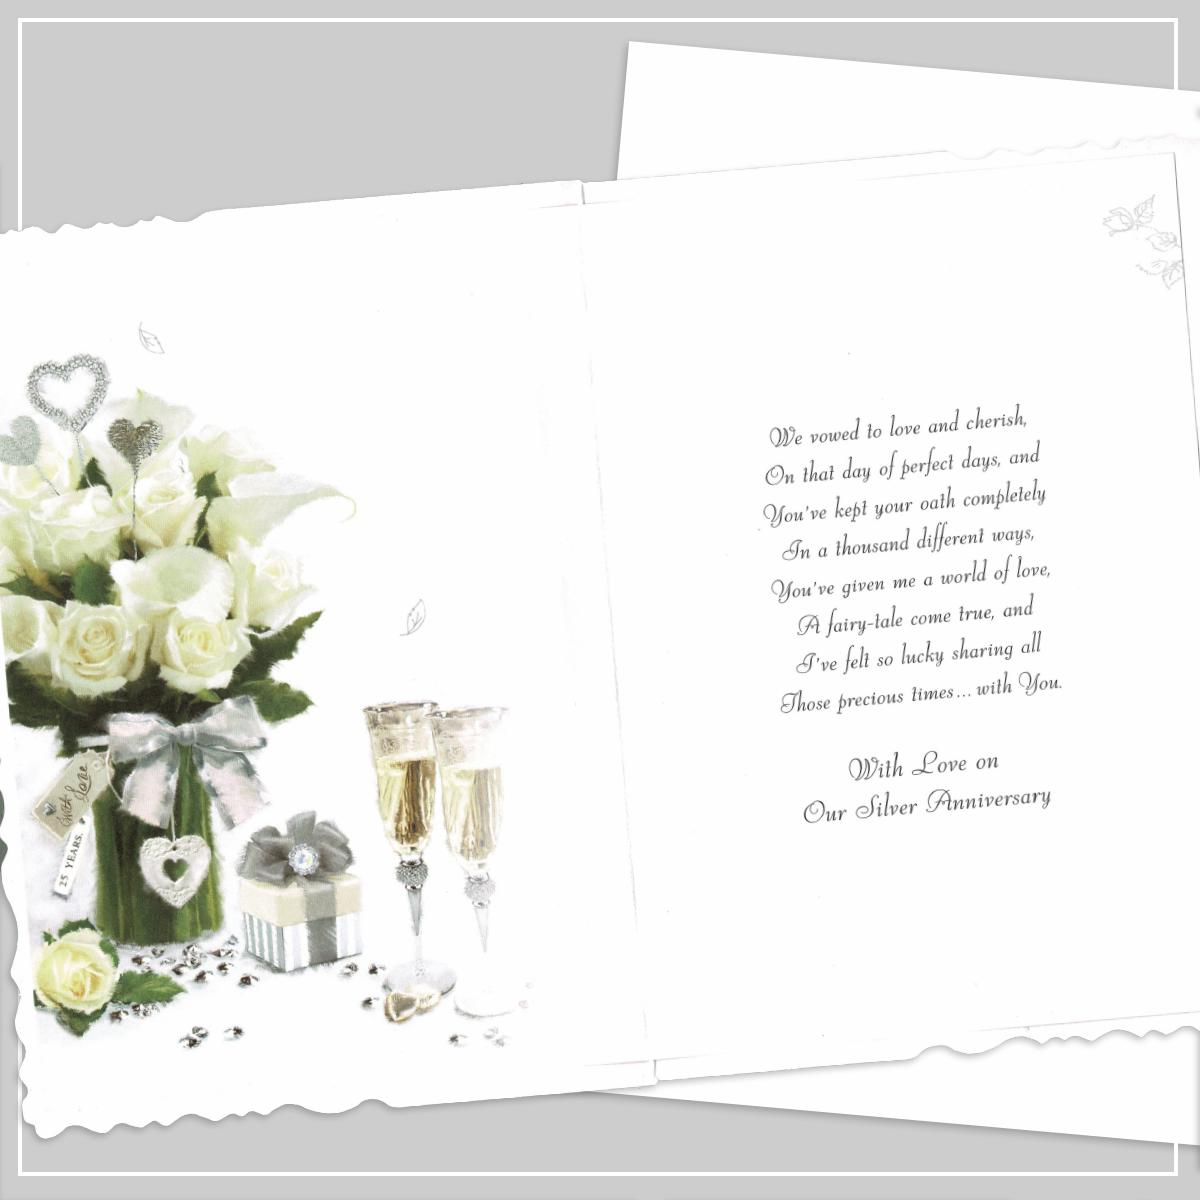 Inside Of Wife 25th Anniversary Card Showing Layout And Printed Text